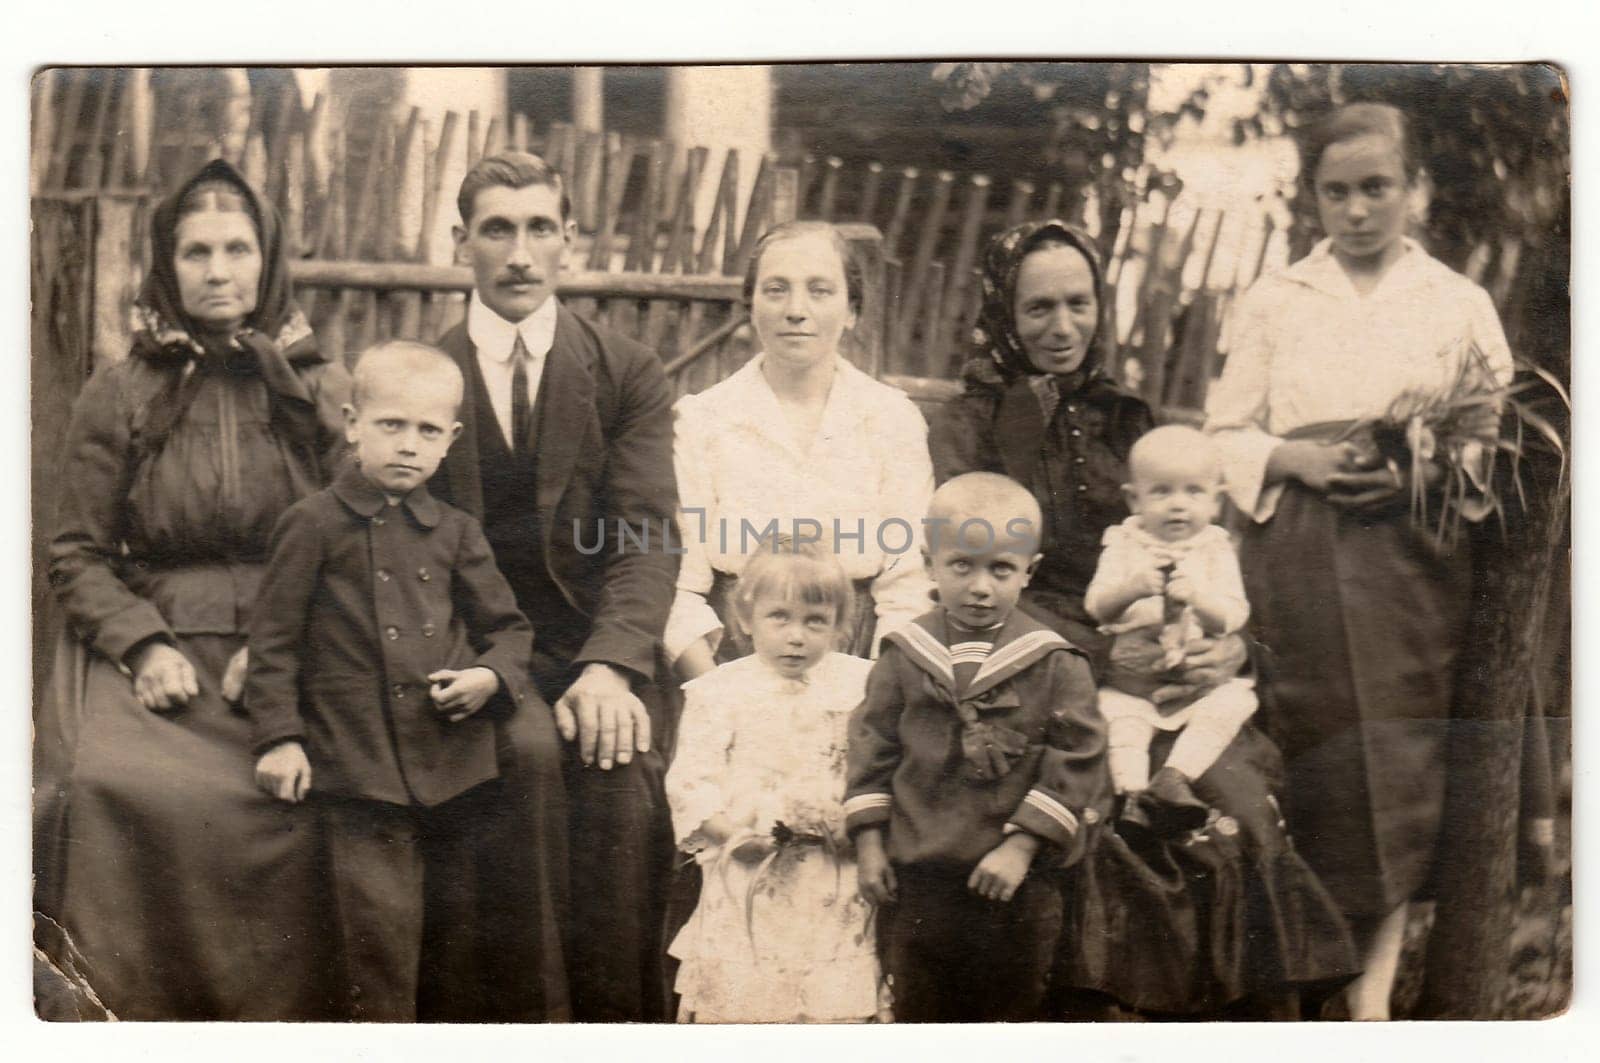 Vintage photo shows a big rural family in front of wooden fence. Black & white antique photography. by roman_nerud